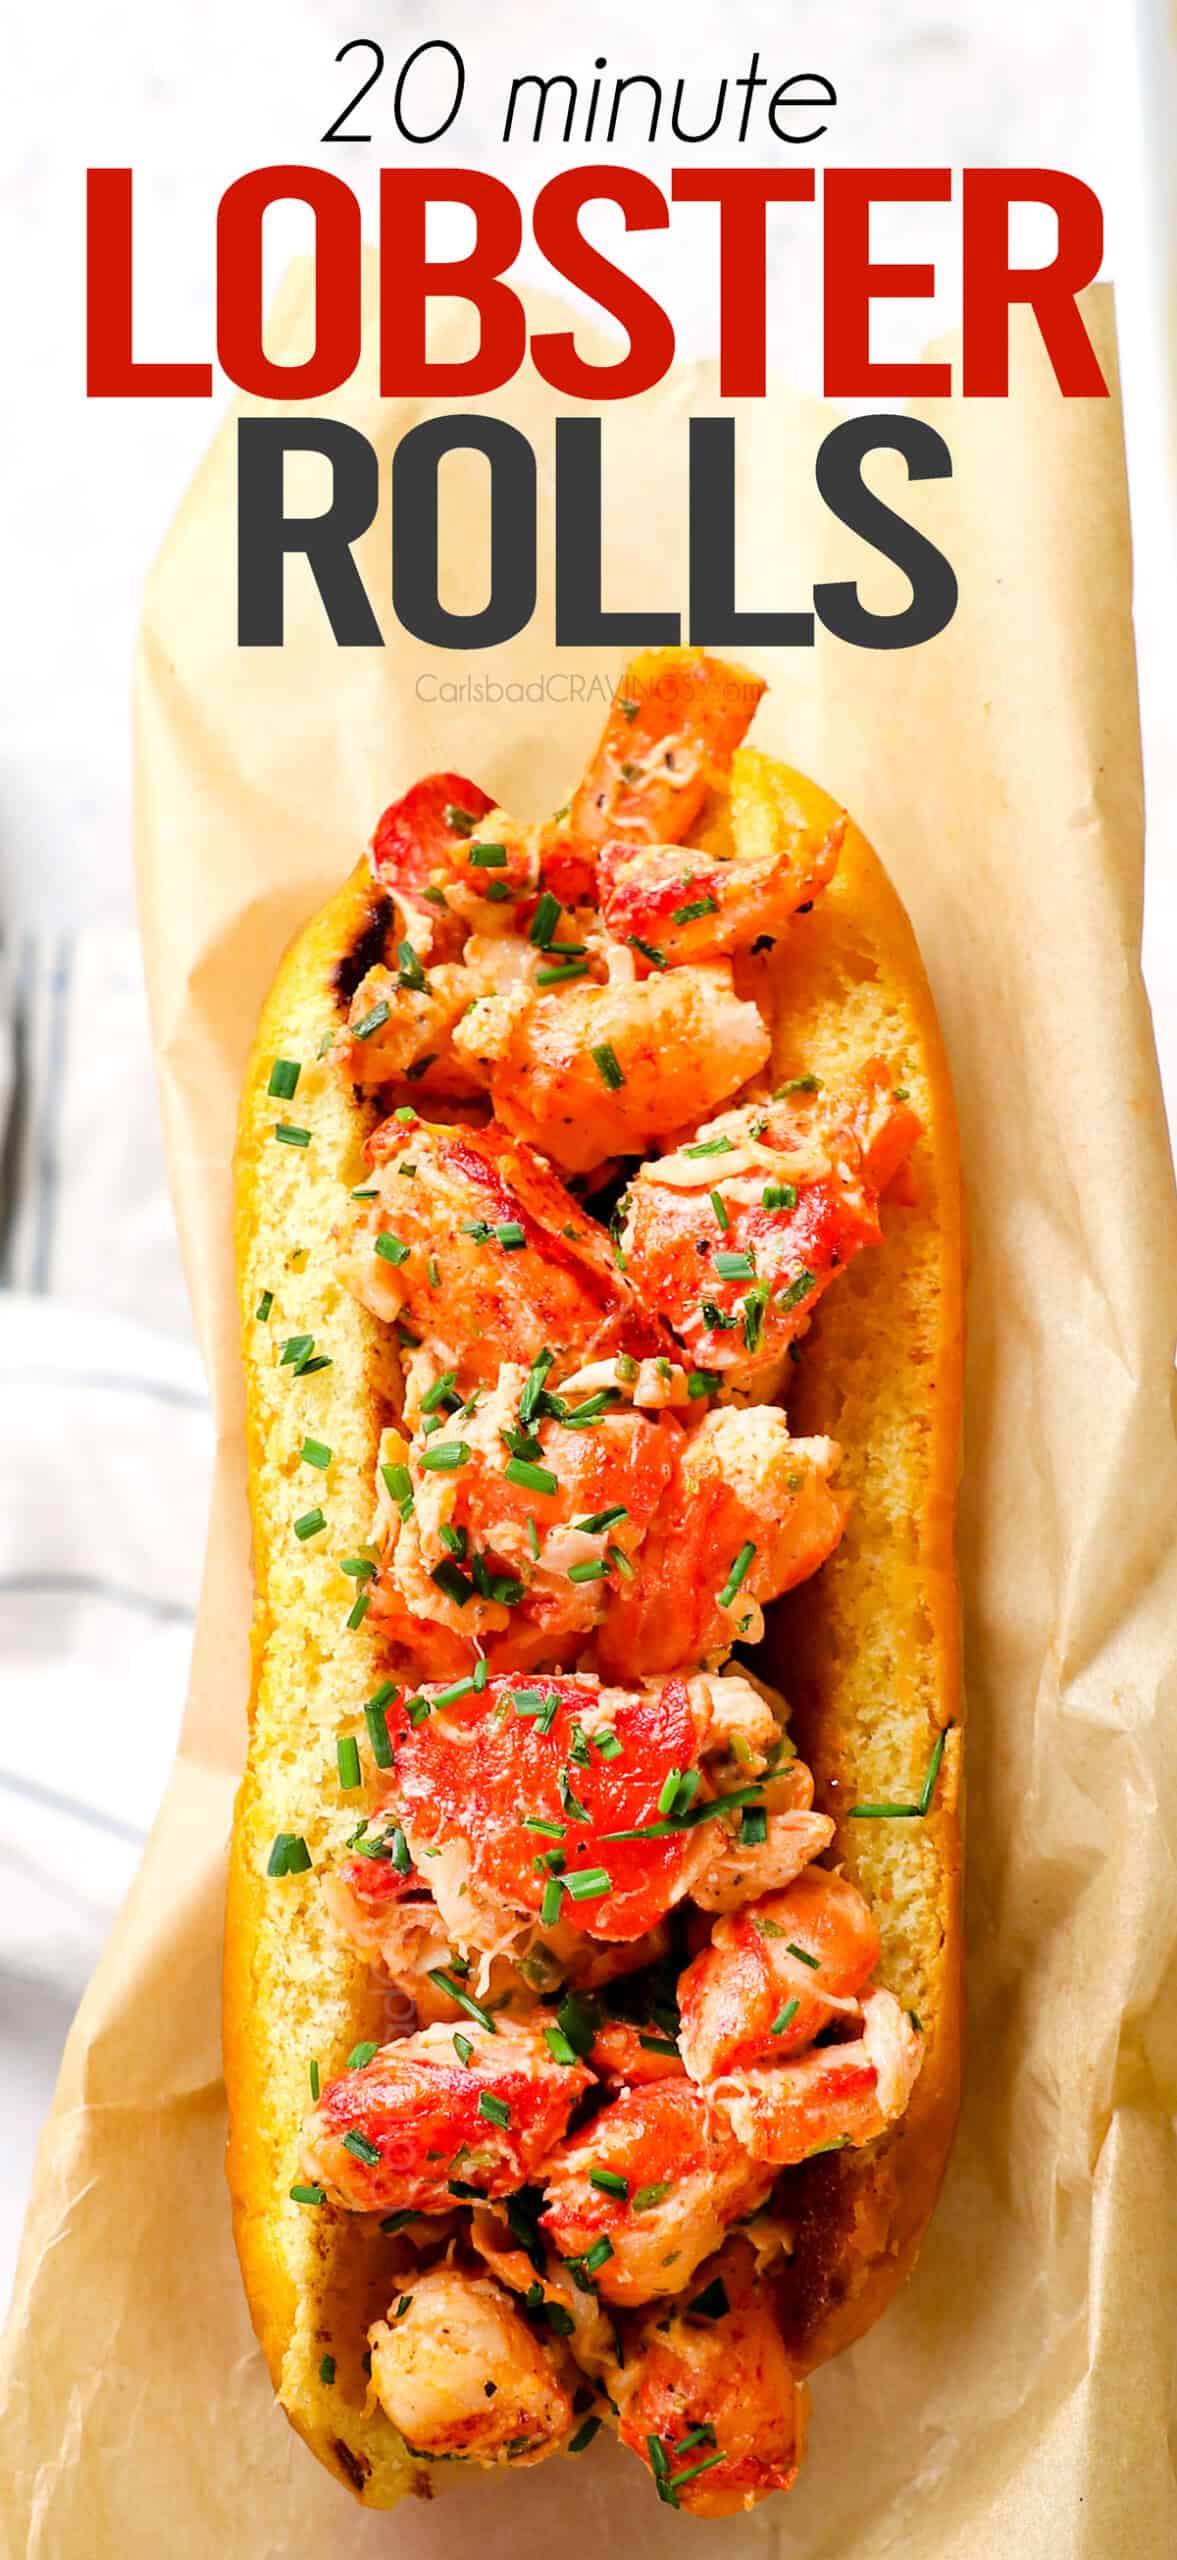 holding a Main lobster roll showing the creamy mayo dressing